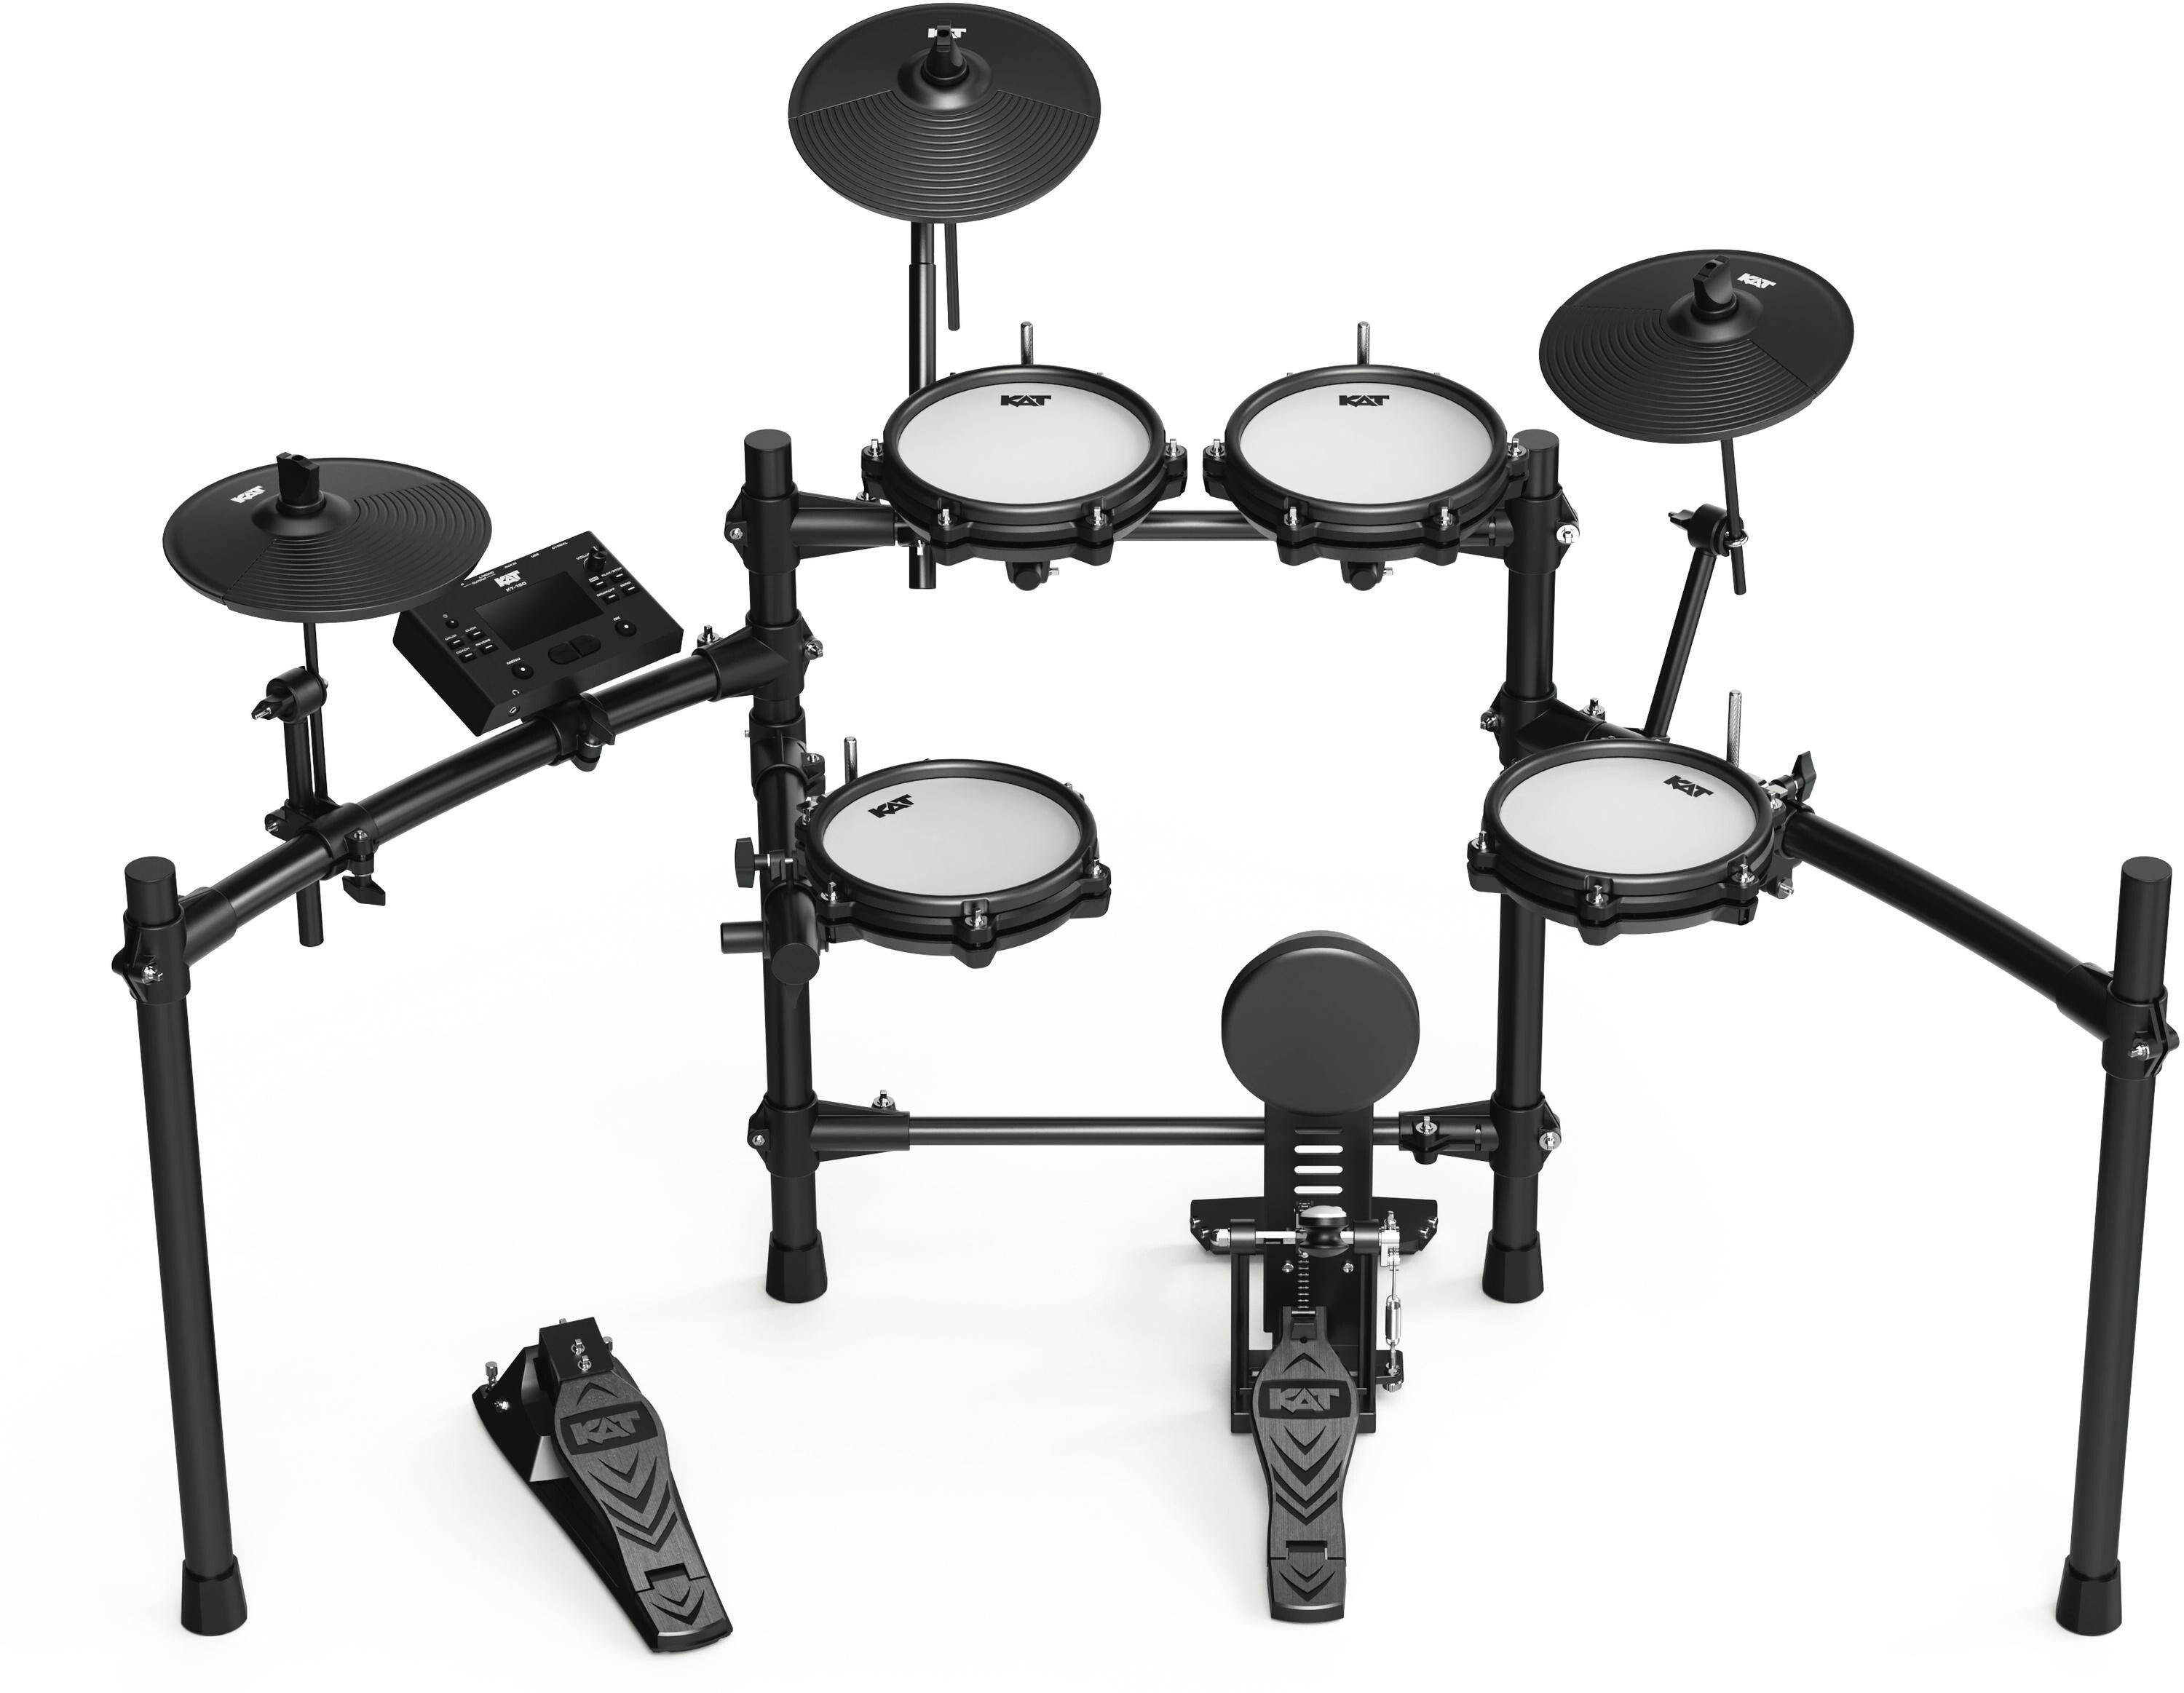 KAT Percussion KT-150 All Mesh Electronic Drum Kit | Sweetwater